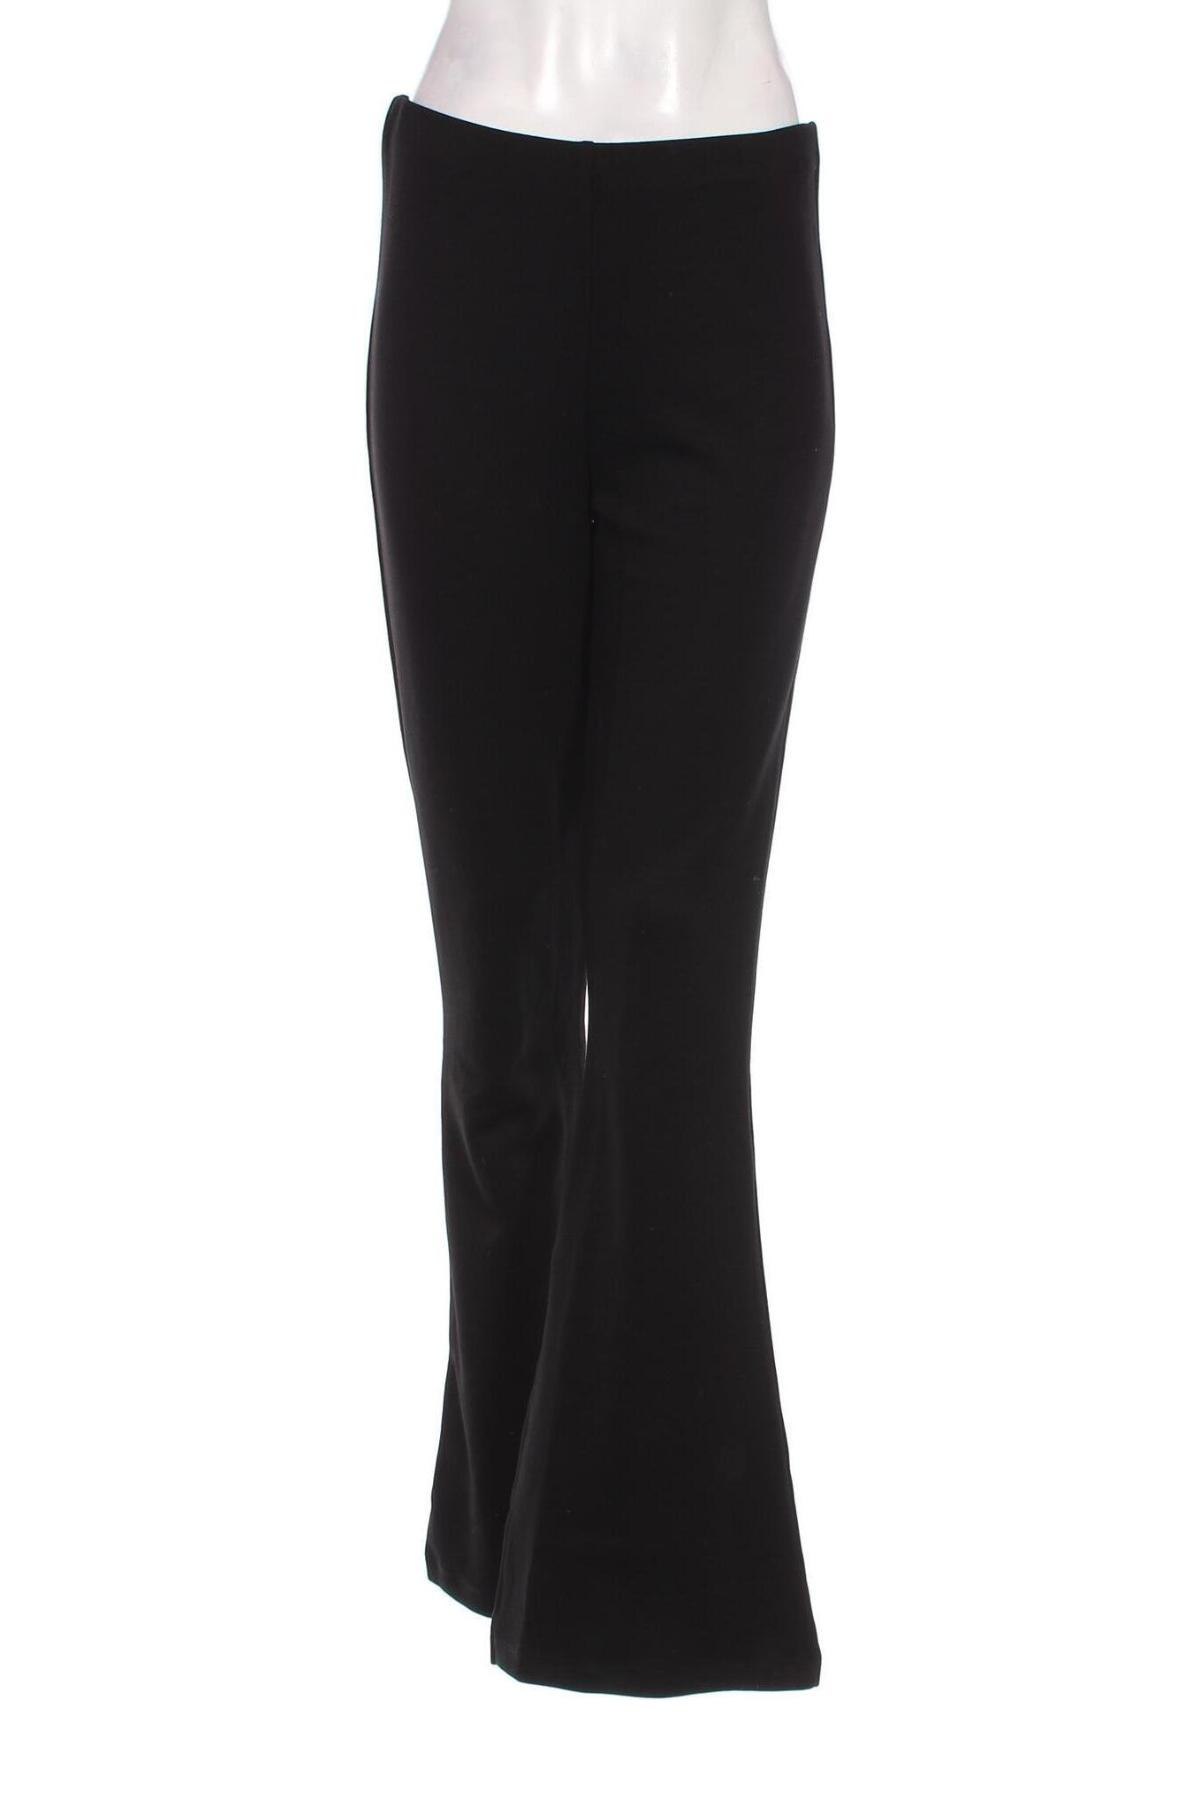 Damenhose Katy Perry exclusive for ABOUT YOU, Größe M, Farbe Schwarz, Preis € 21,57